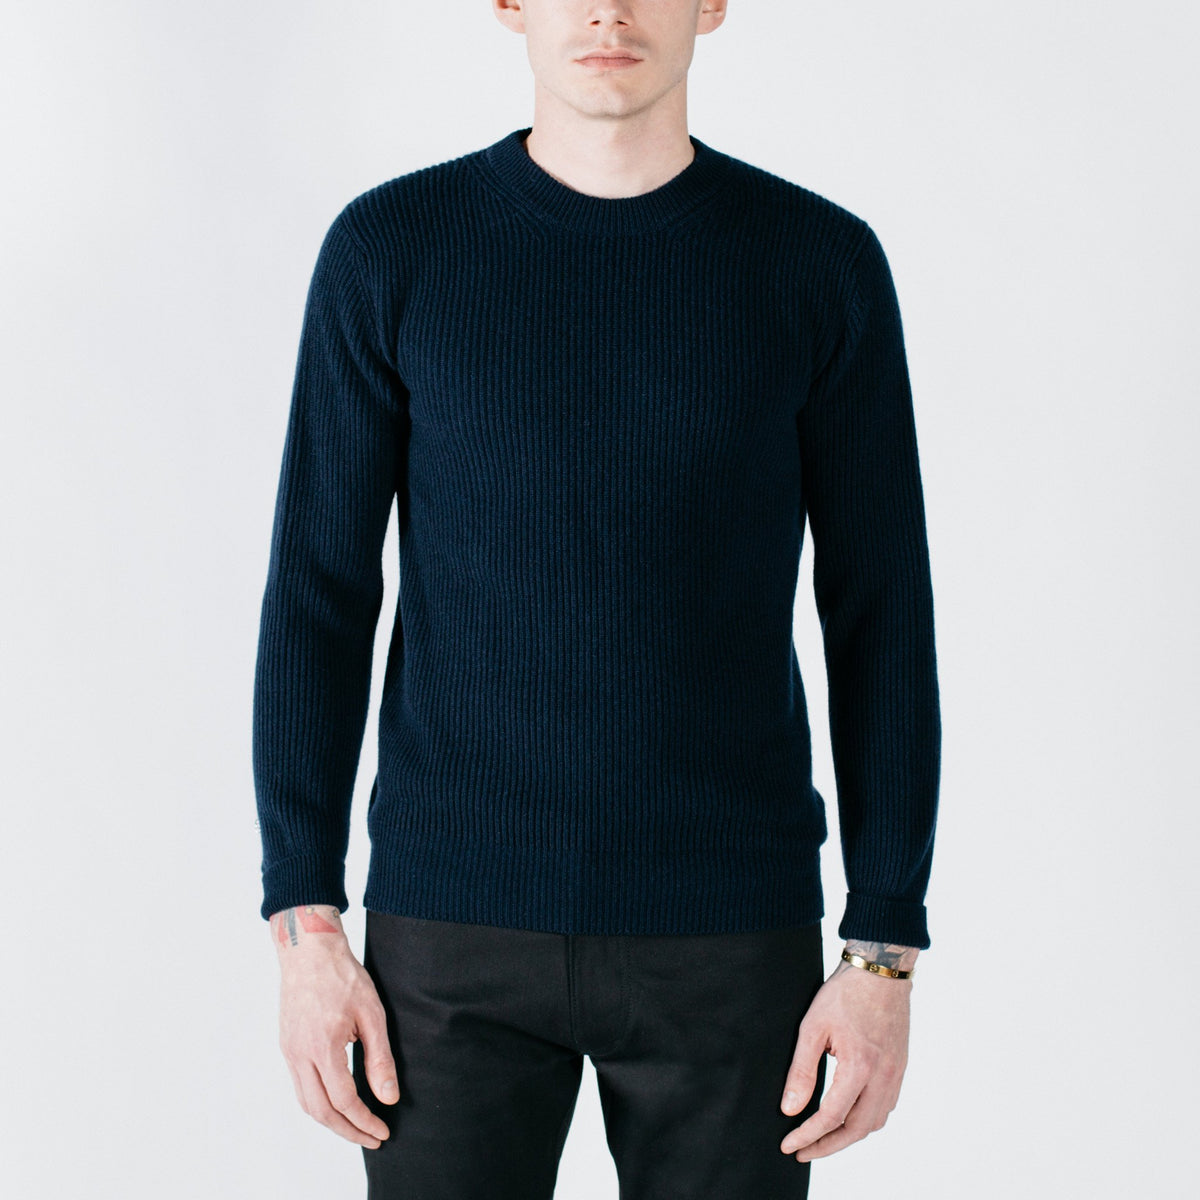 Smuggler Cashmere Crew Sweater - Nero Navy knitwear Commonwealth Proper